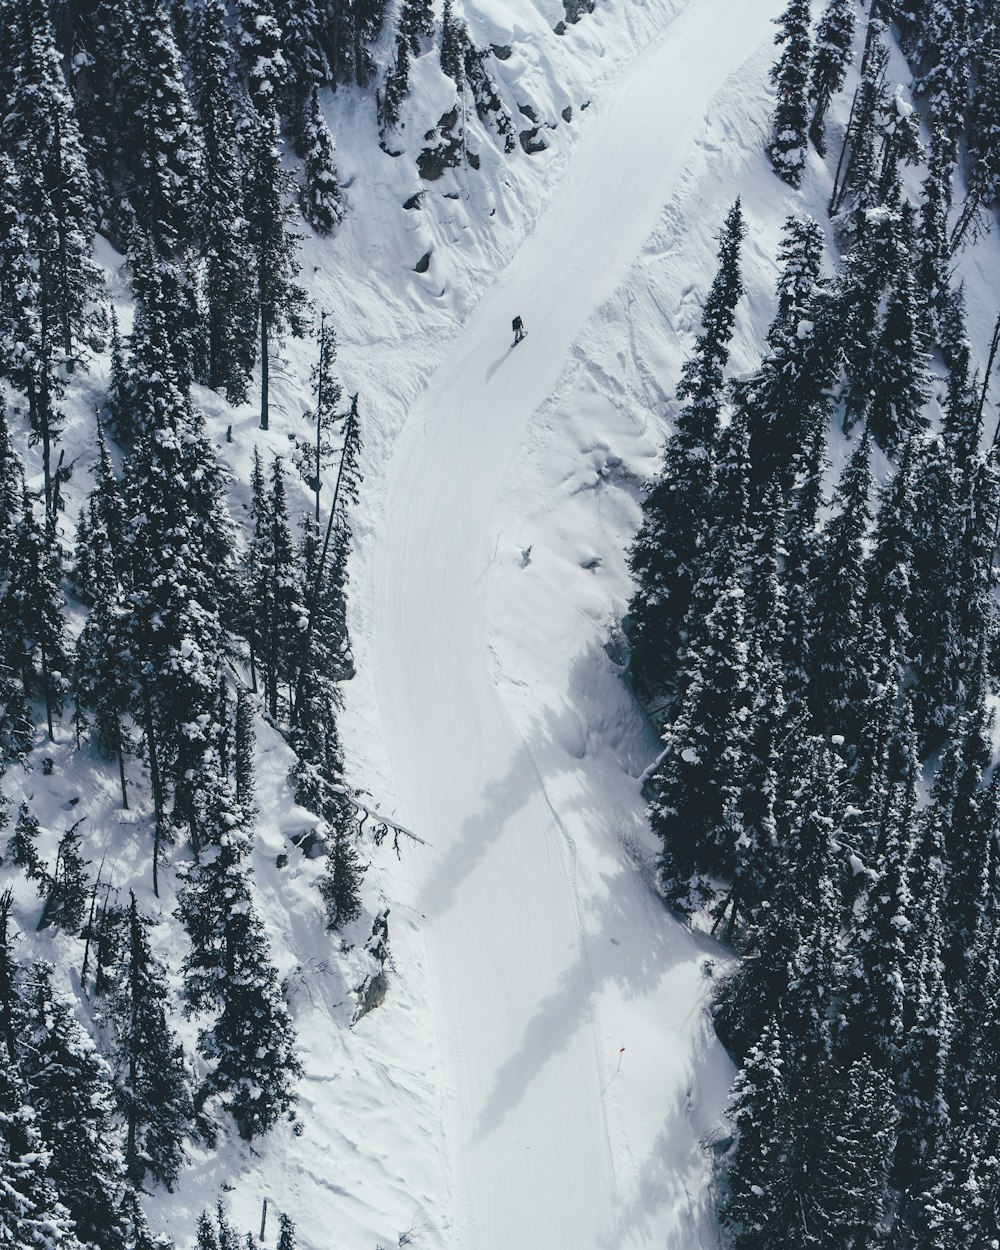 aerial photography of person skiing on snow mountain\